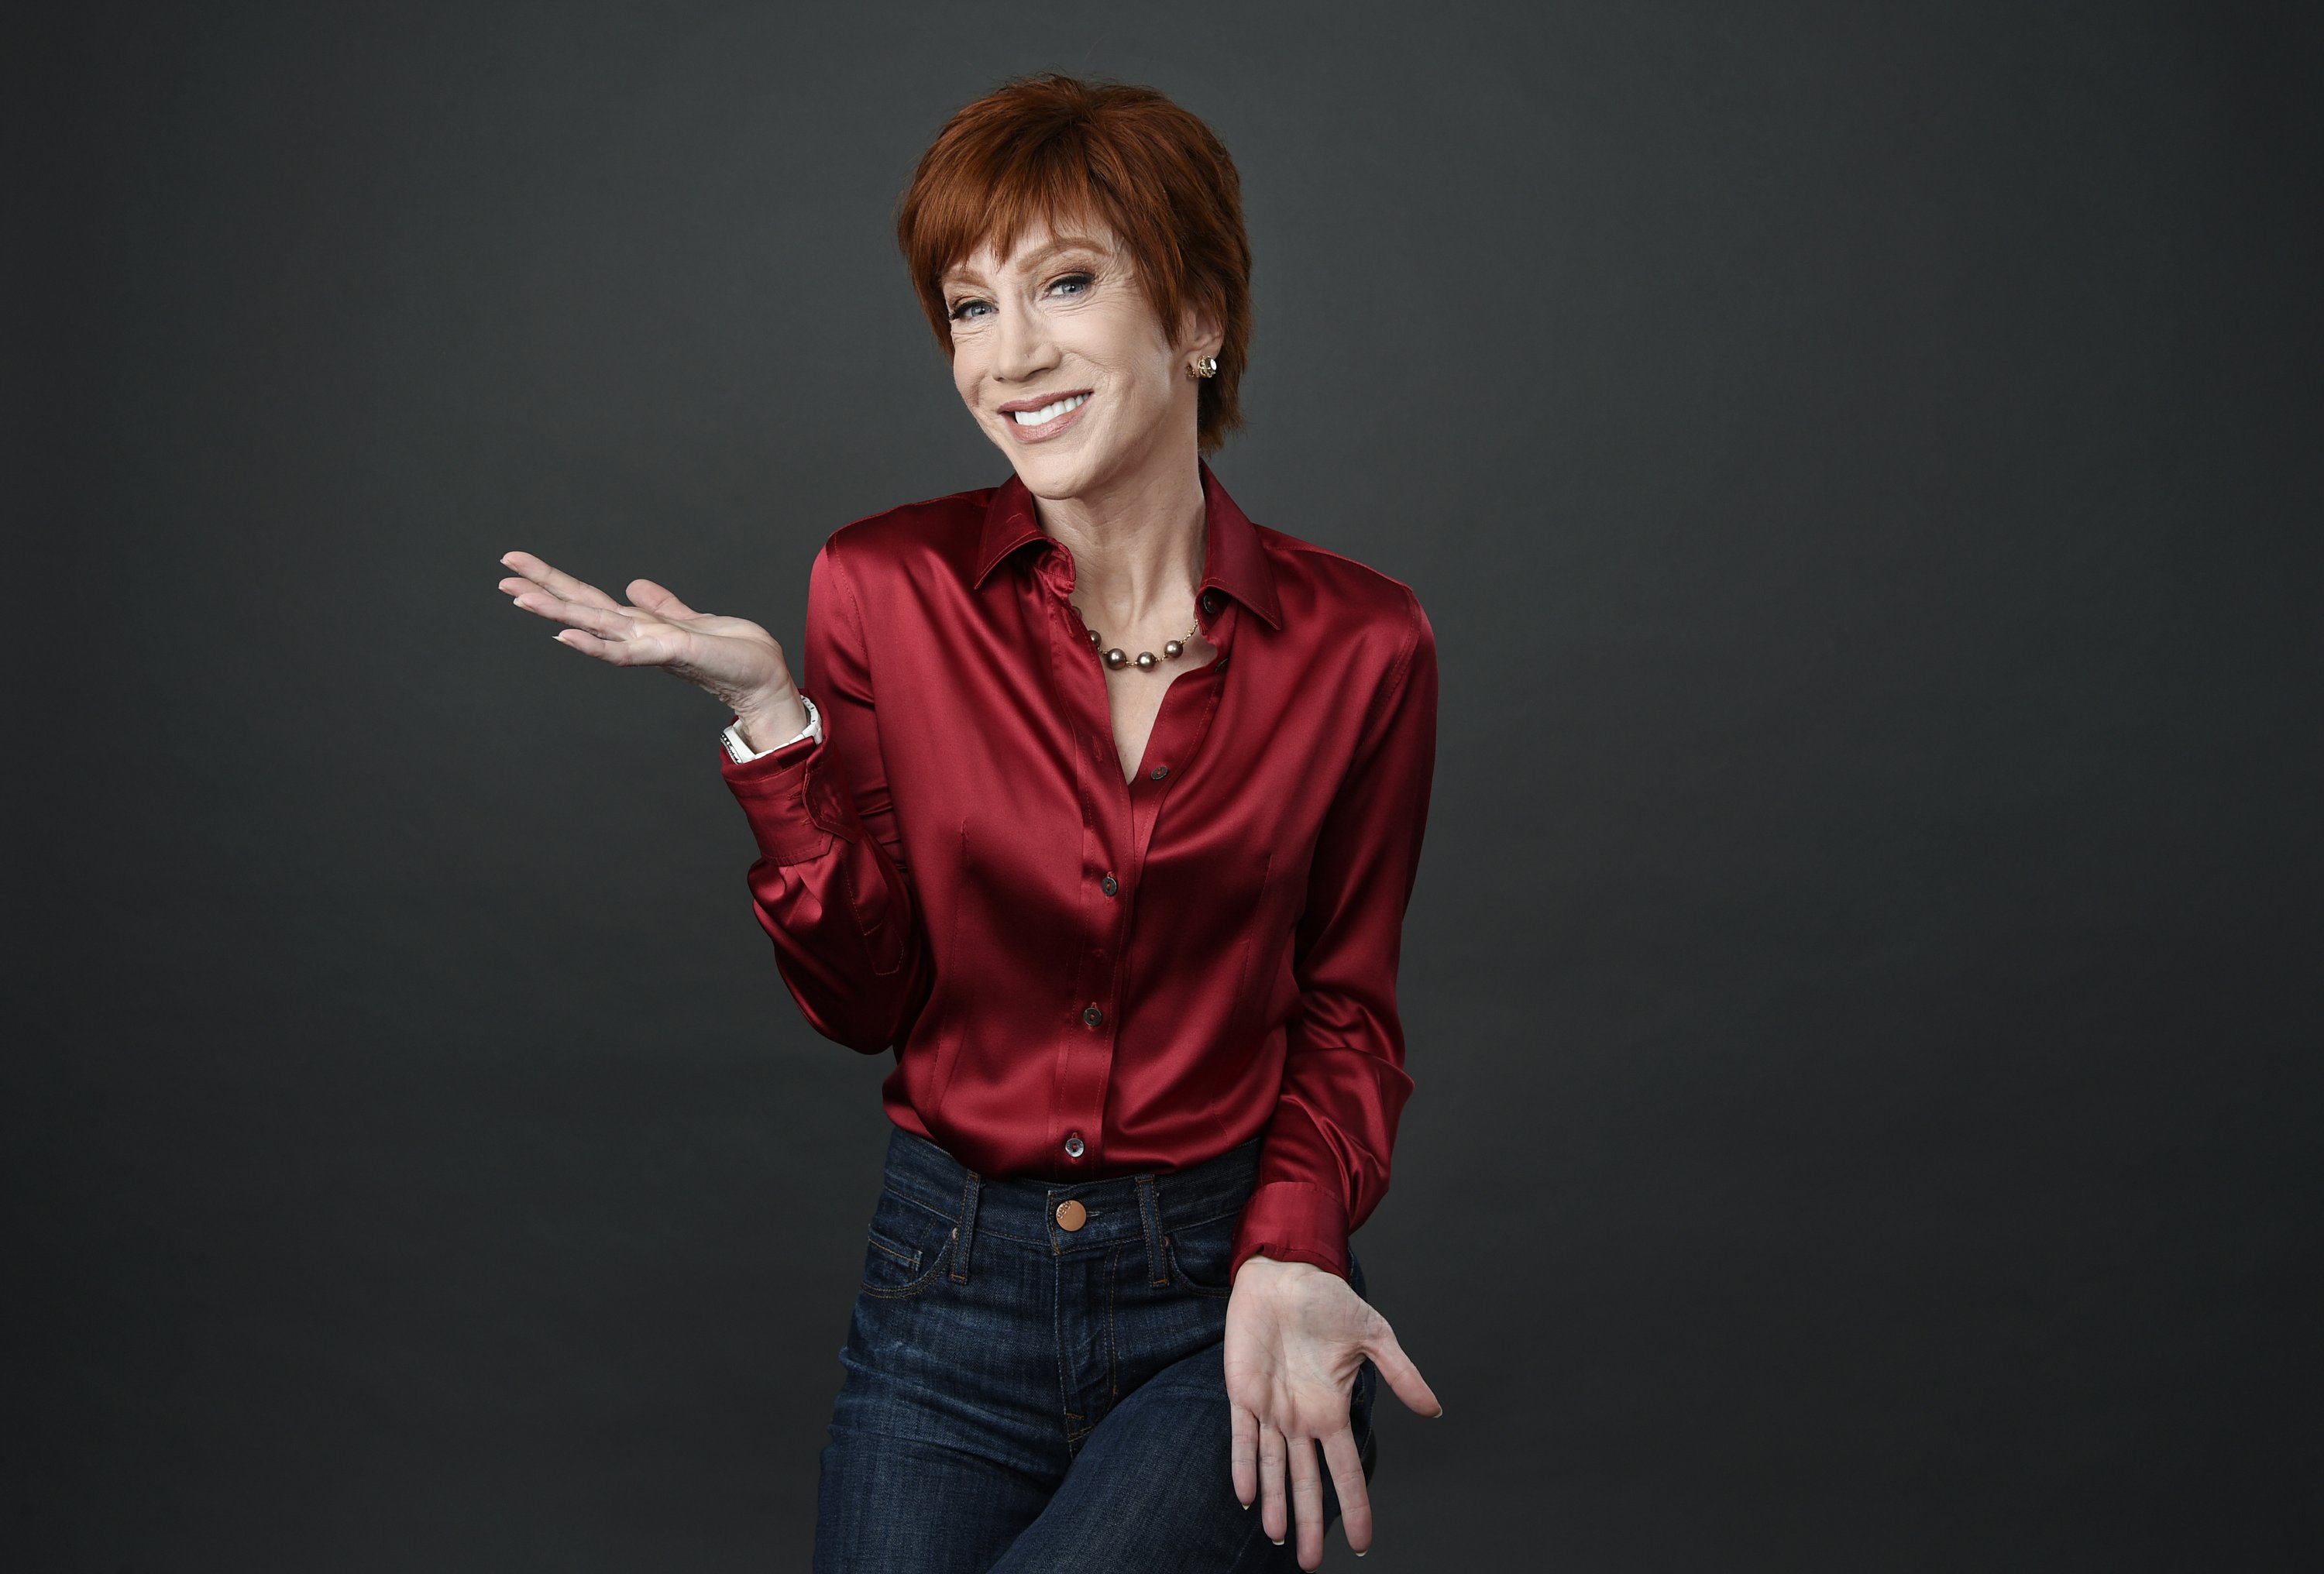 Kathy griffin hot pics